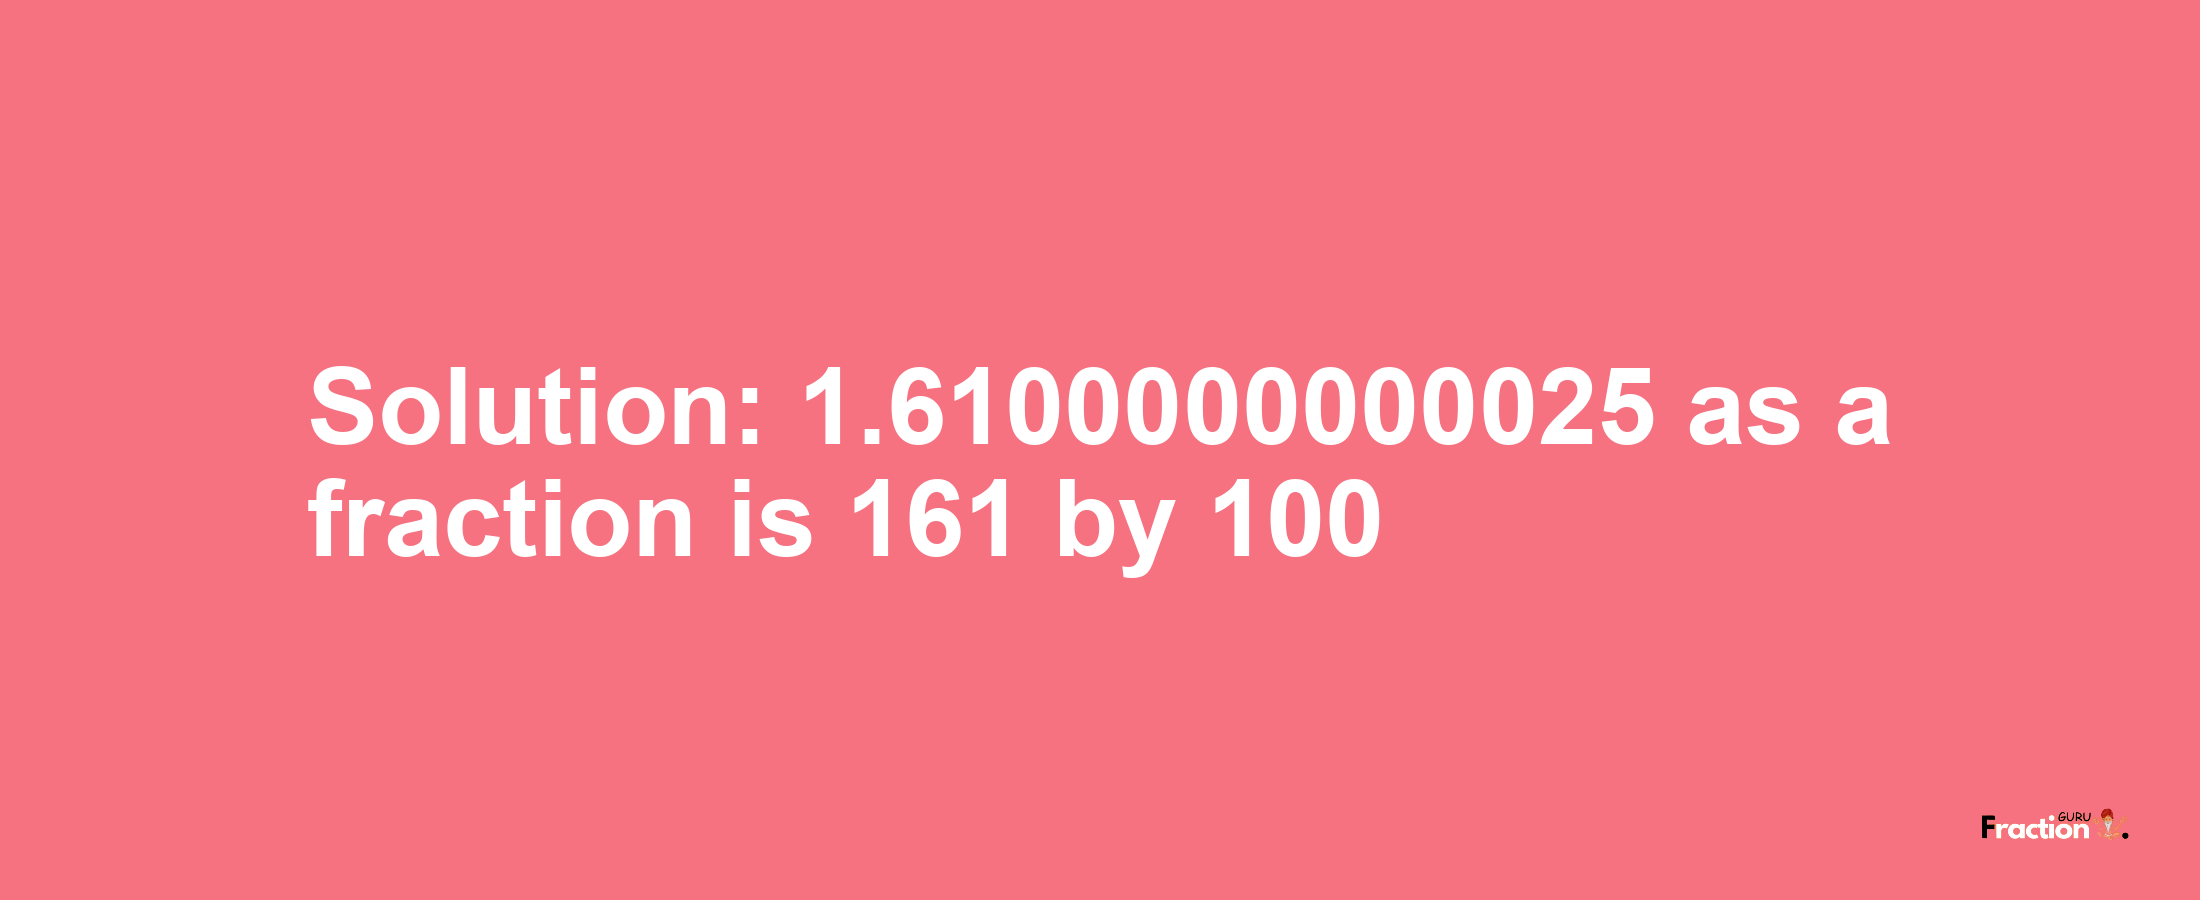 Solution:1.6100000000025 as a fraction is 161/100